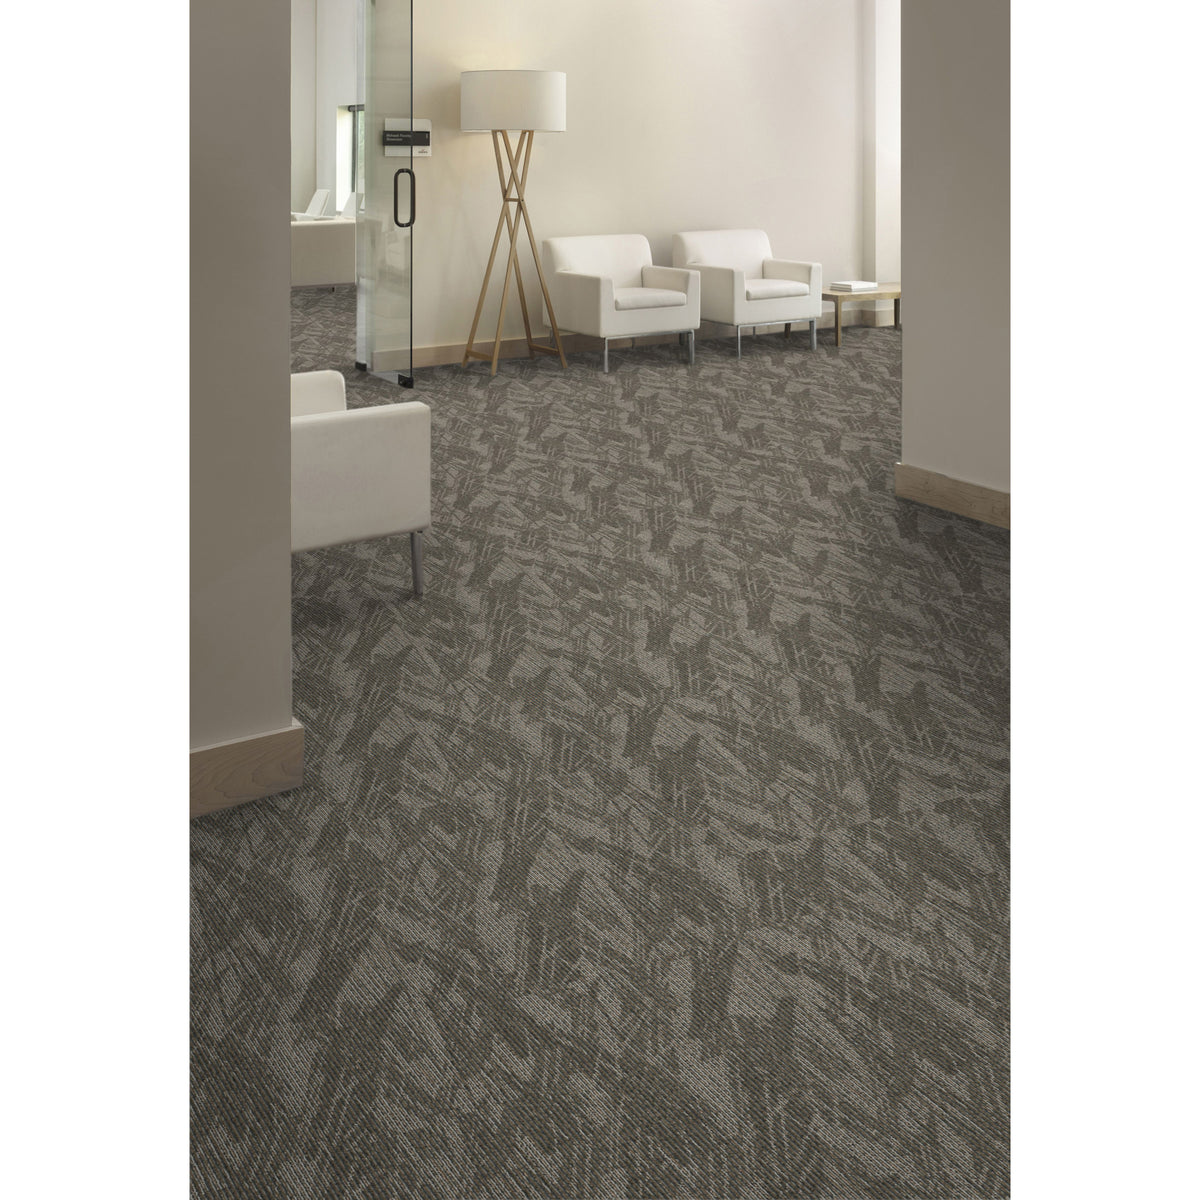 Aladdin Commercial Total Visual Carpet Tile - So Intrigued - Room